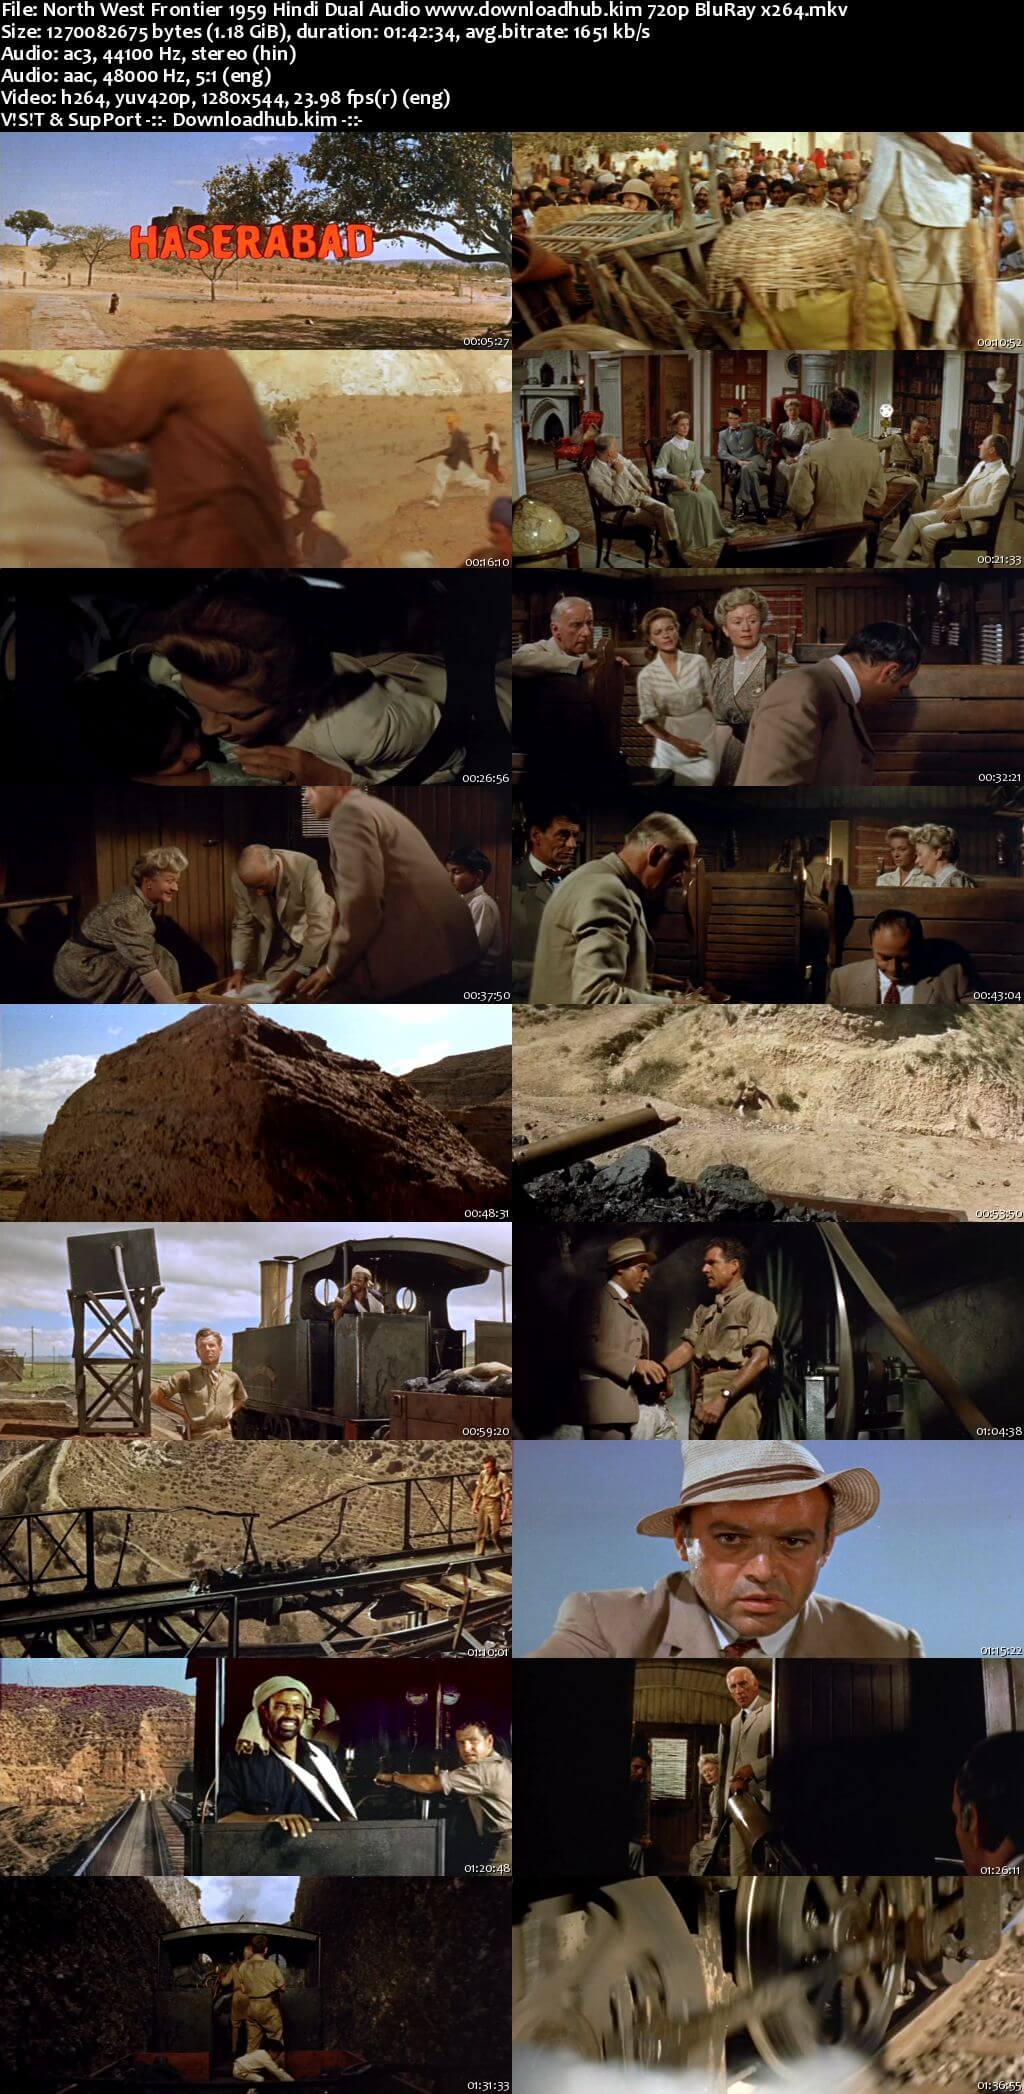 North West Frontier 1959 Hindi Dual Audio 720p BluRay x264